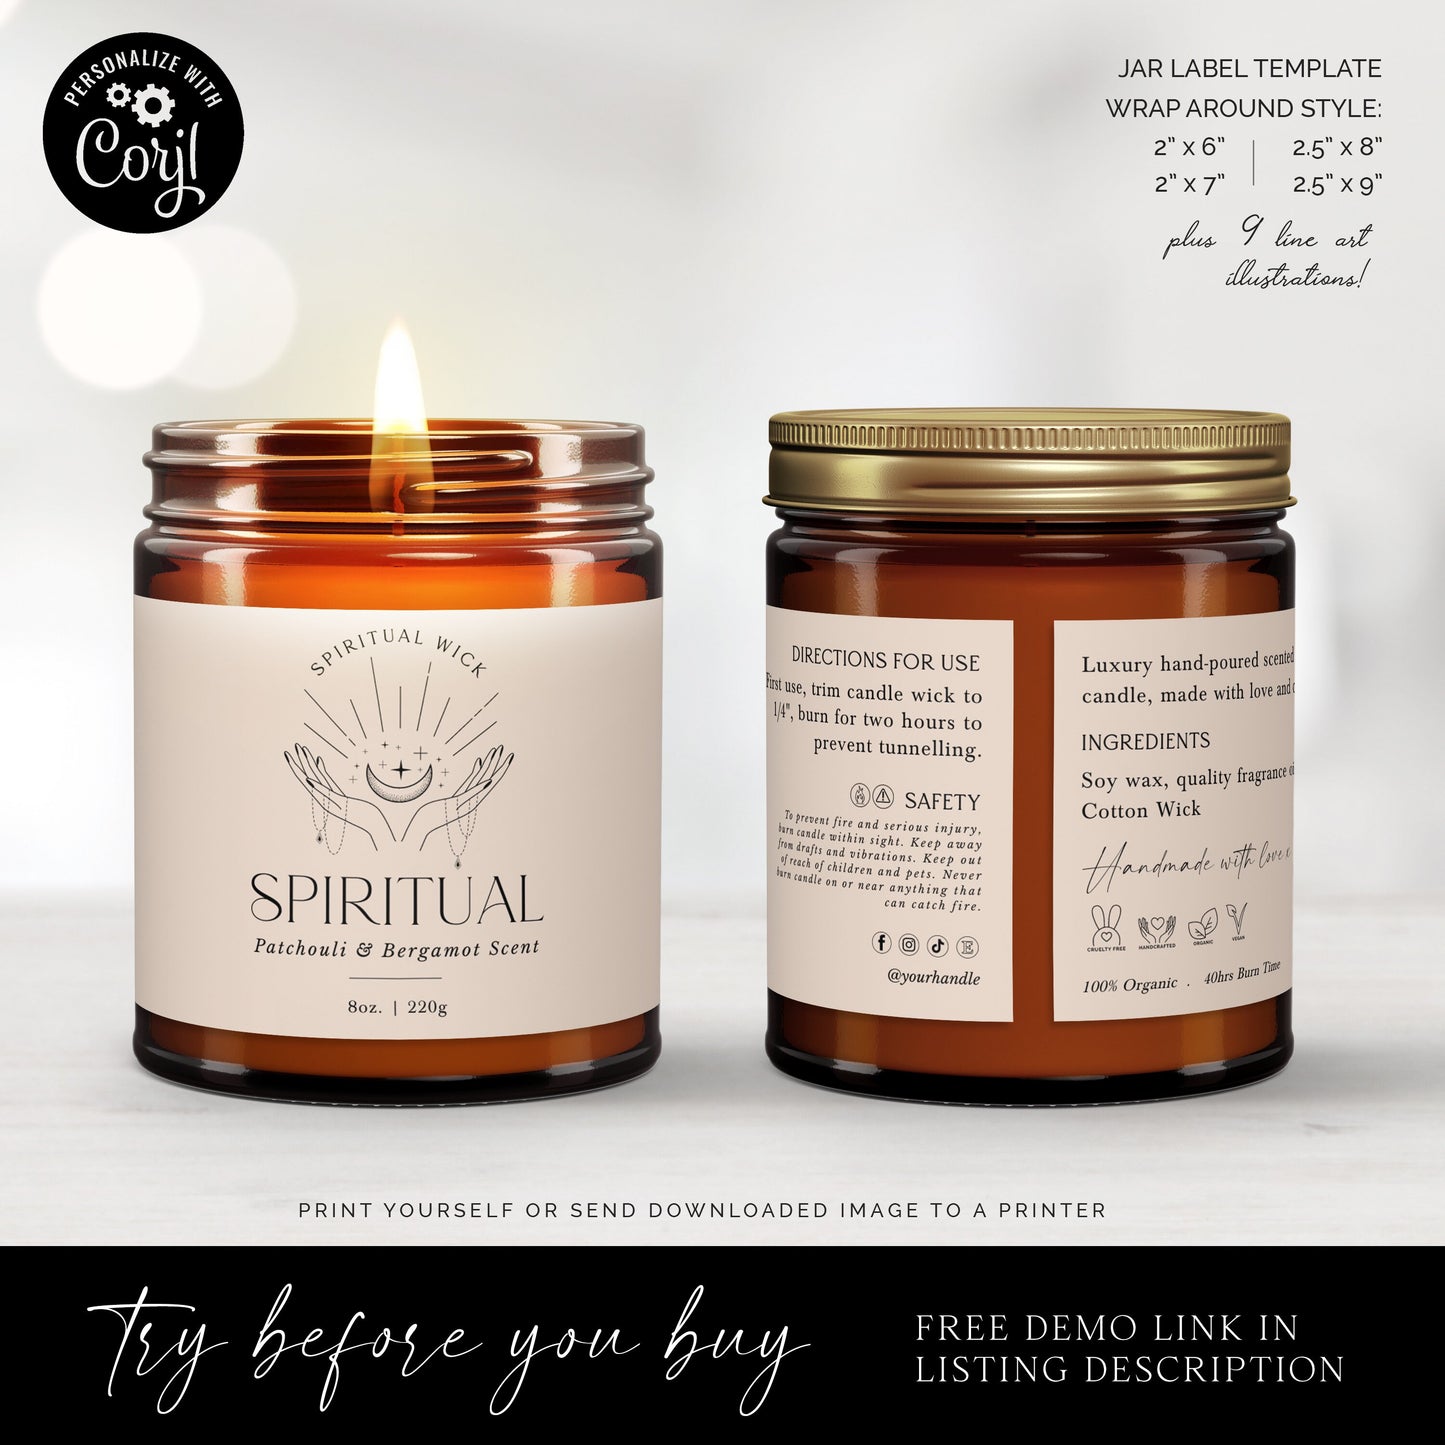 Editable Jar Label Template (4 Sizes) Spiritual Esoteric Personalised Wrap Around Candle / Cosmetic Skincare Label Design Printable  SPI-001